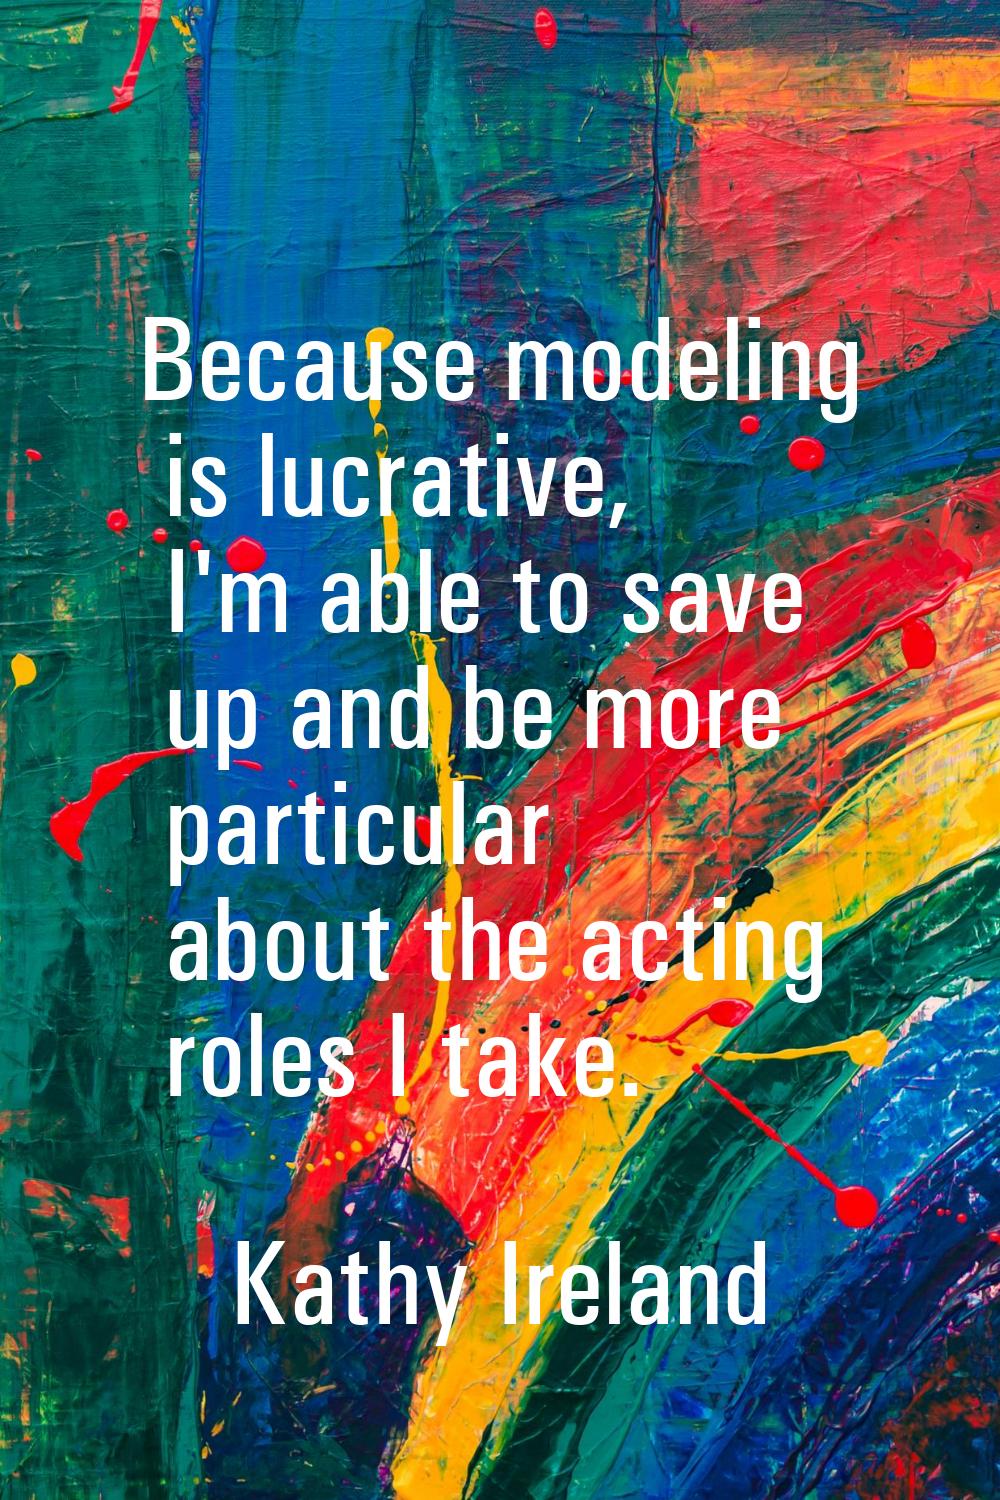 Because modeling is lucrative, I'm able to save up and be more particular about the acting roles I 